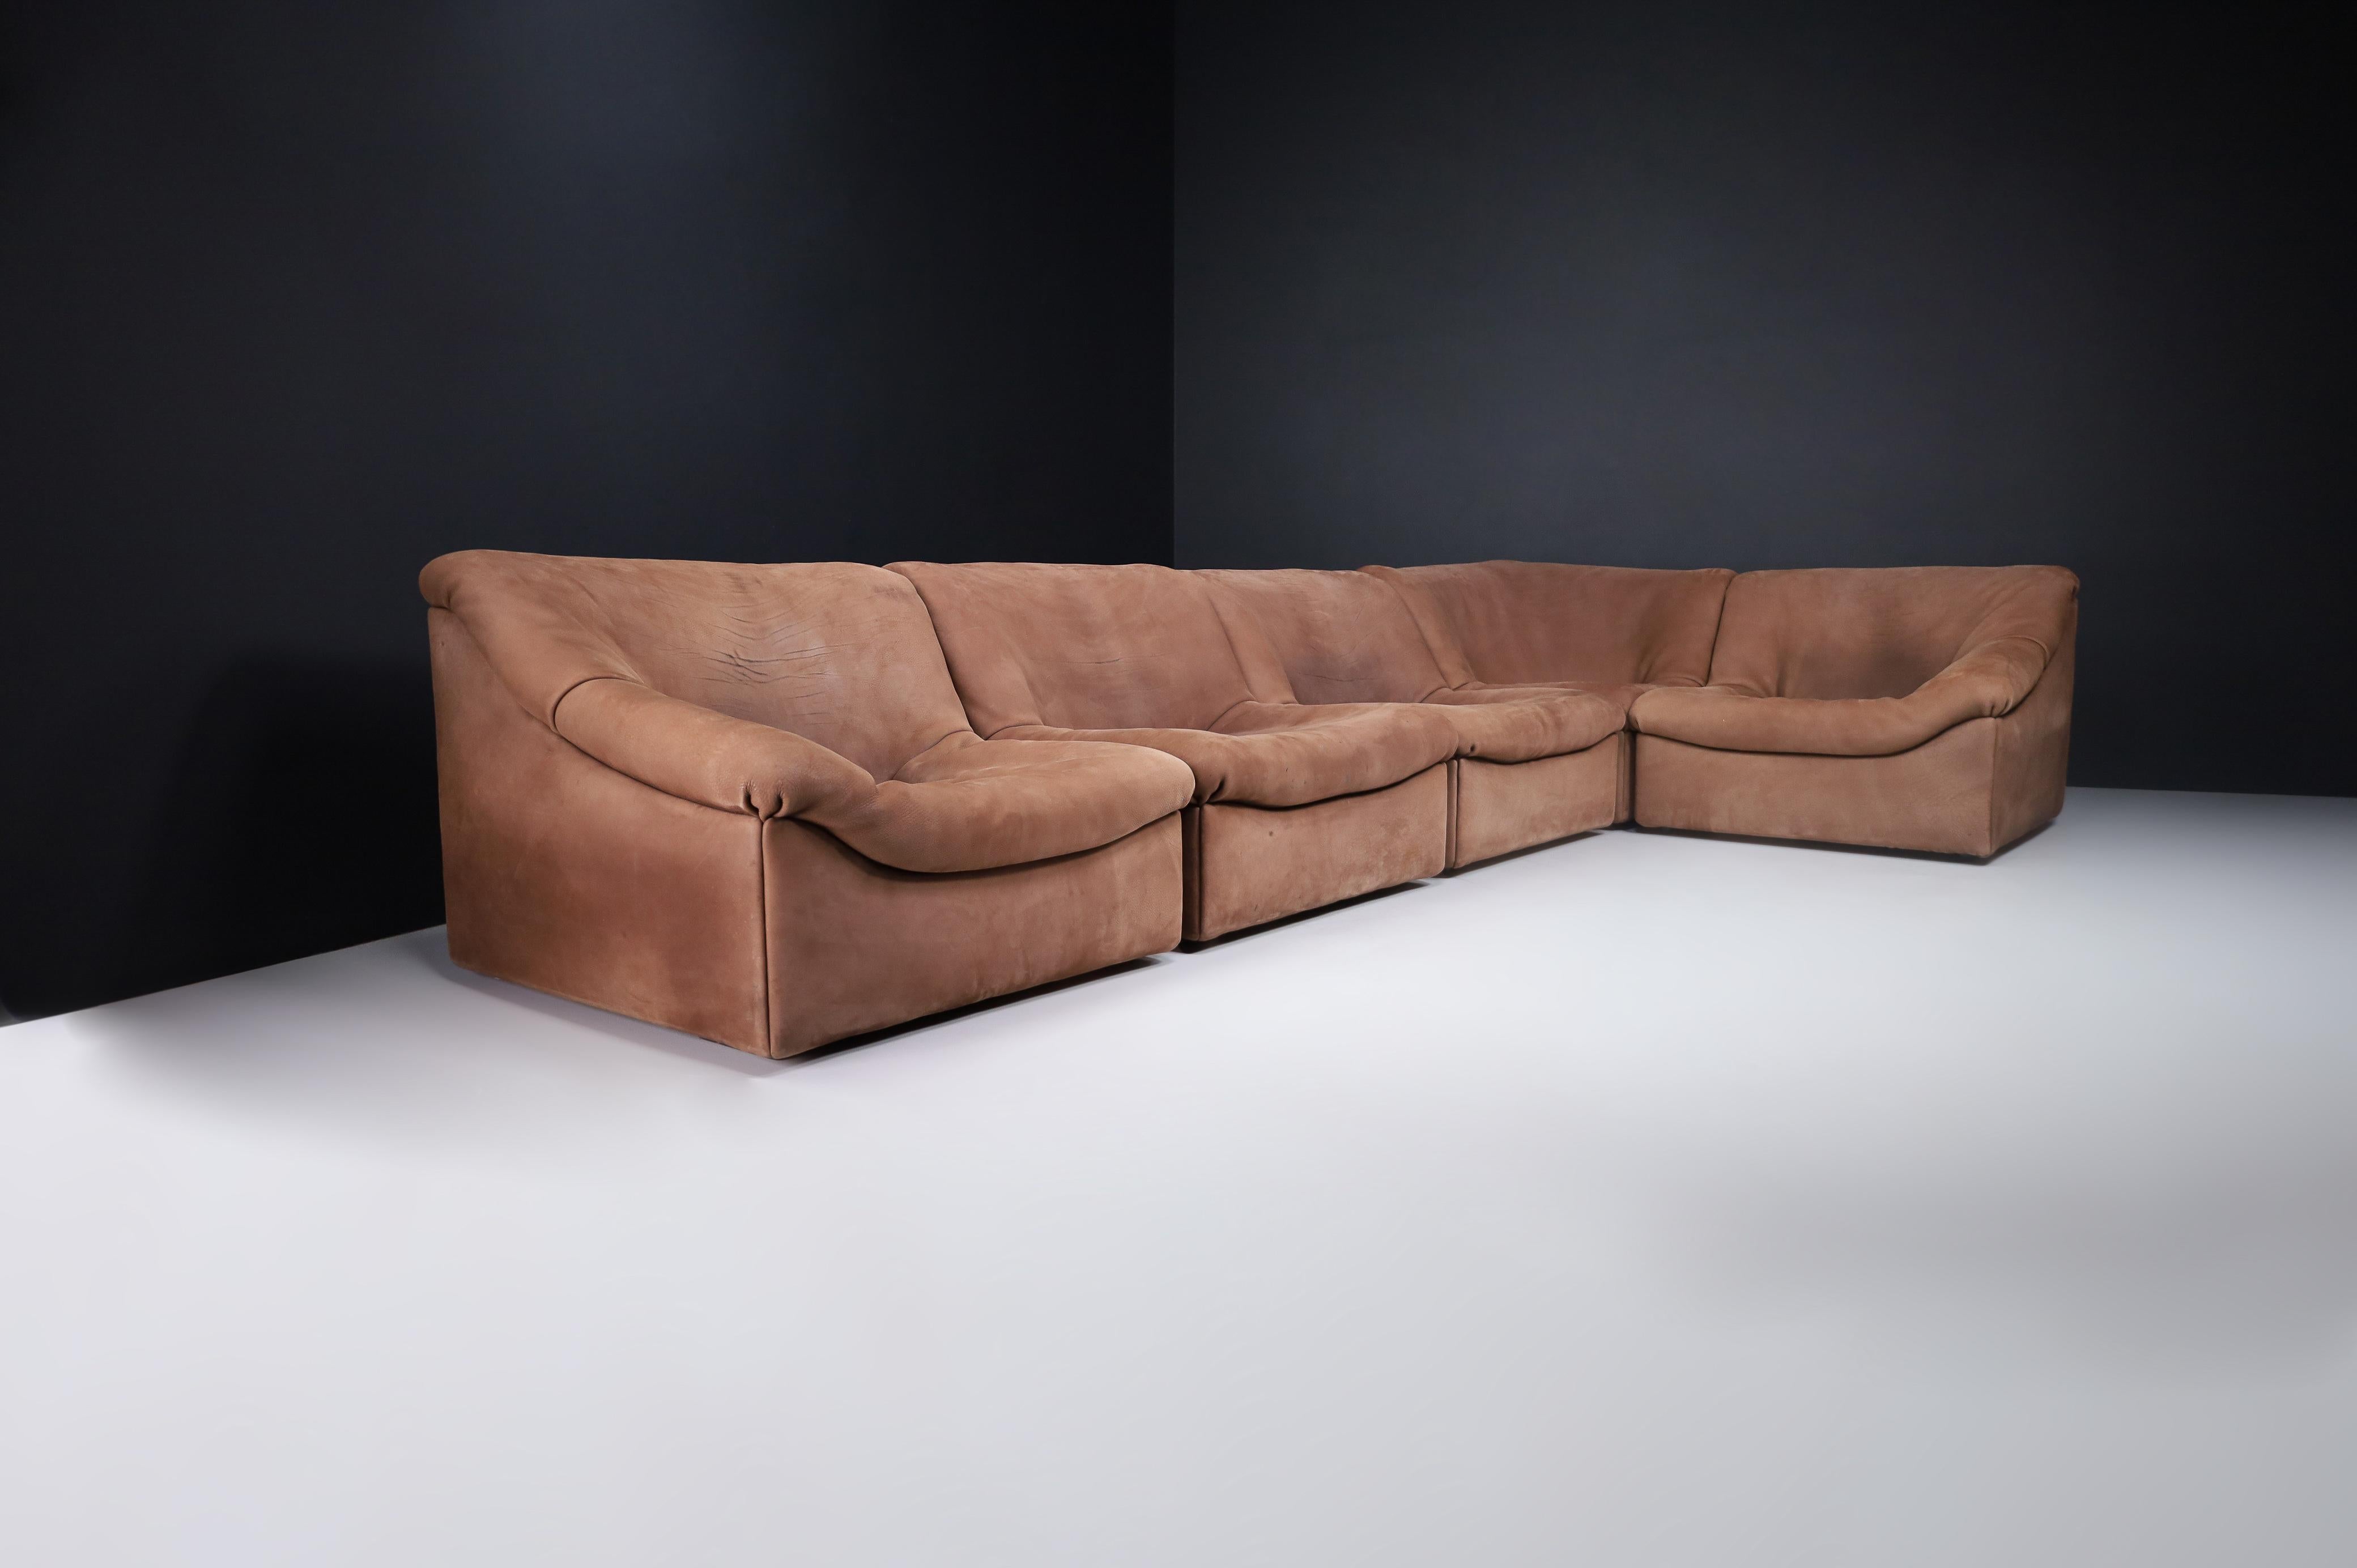 20th Century De Sede DS46 Sectional Sofa-Livingroomset in Buffalo Leather, Switzerland 1970s For Sale